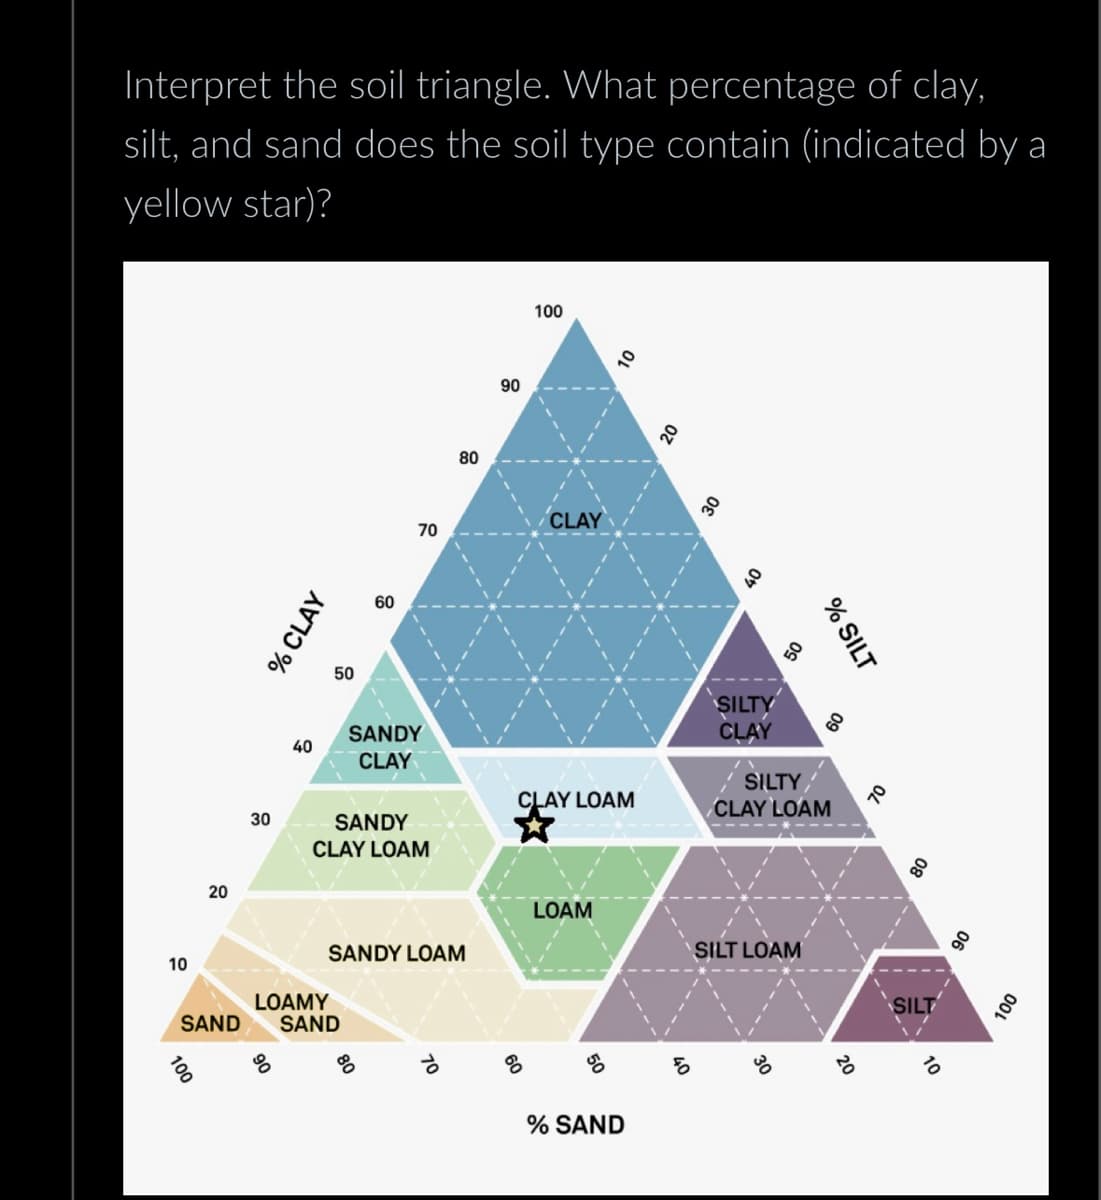 Interpret the soil triangle. What percentage of clay,
silt, and sand does the soil type contain (indicated by a
yellow star)?
10
20
% CLAY
50
60
80
90
100
01
20
70
CLAY
30
40
% SILT
SANDY
SILTY
CLAY
60
40
CLAY
SILTY
CLAY LOAM
30
CLAY LOAM
SANDY
CLAY LOAM
SANDY LOAM
70
80
LOAM
SILT LOAM
SILT
40
ㅎ
SAND
LOAMY
SAND
100
%
ㅎ
% SAND